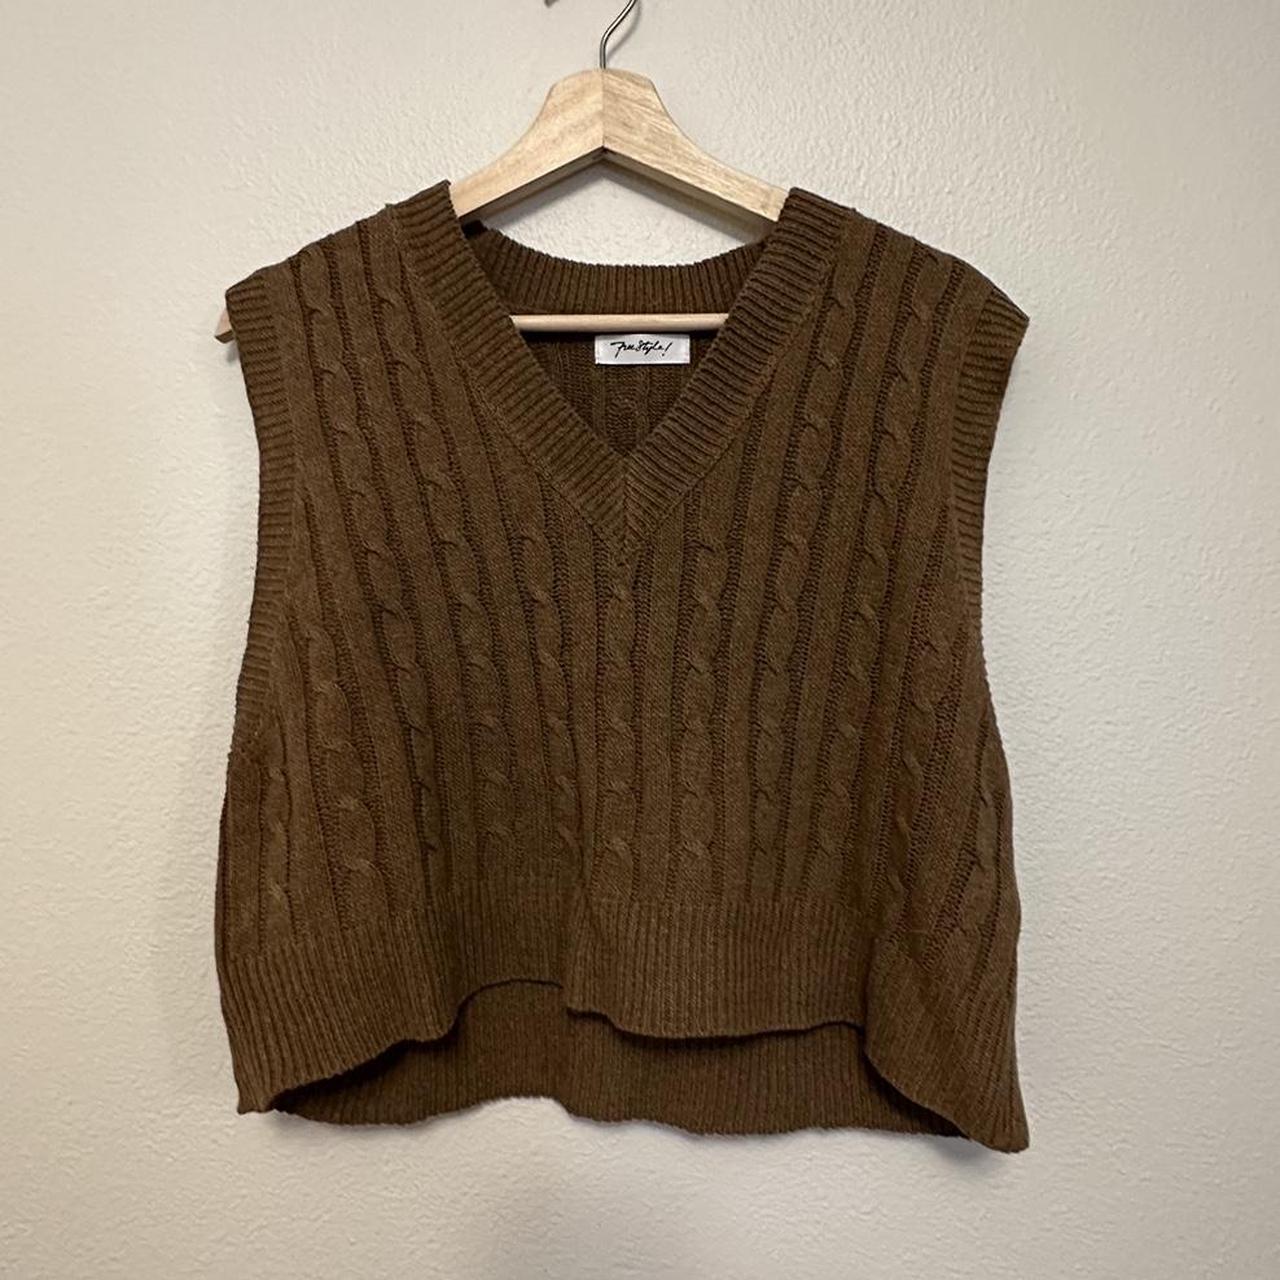 Knit Sweater Vest - Size S pls msg before buying!... - Depop